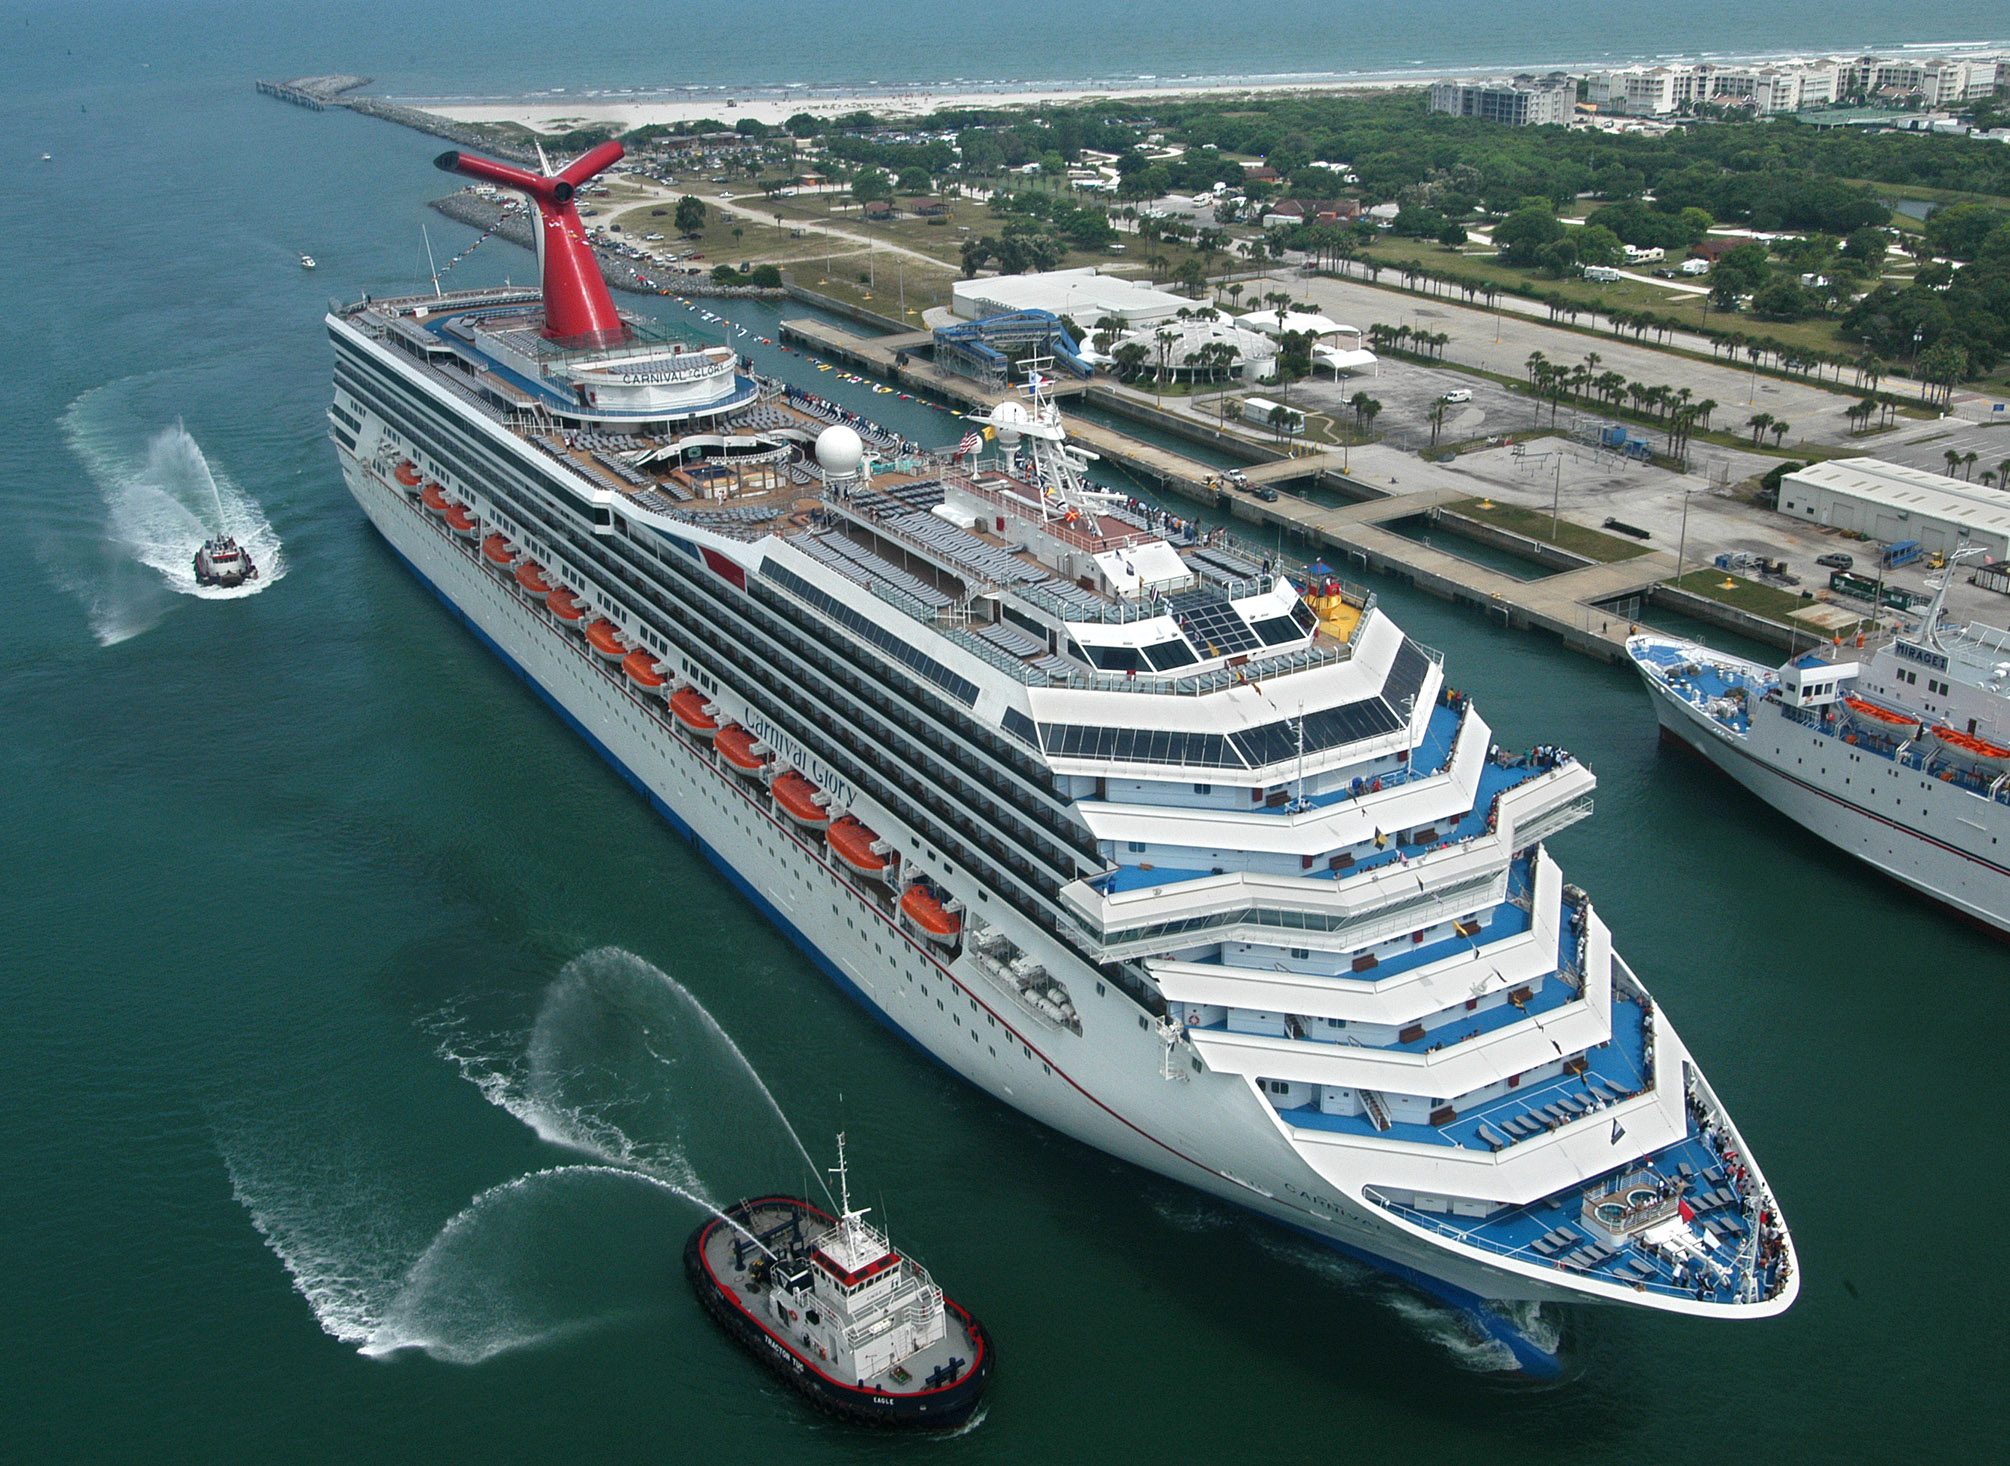 Carnival Cruise Ships Generate 10 Times More Pollution